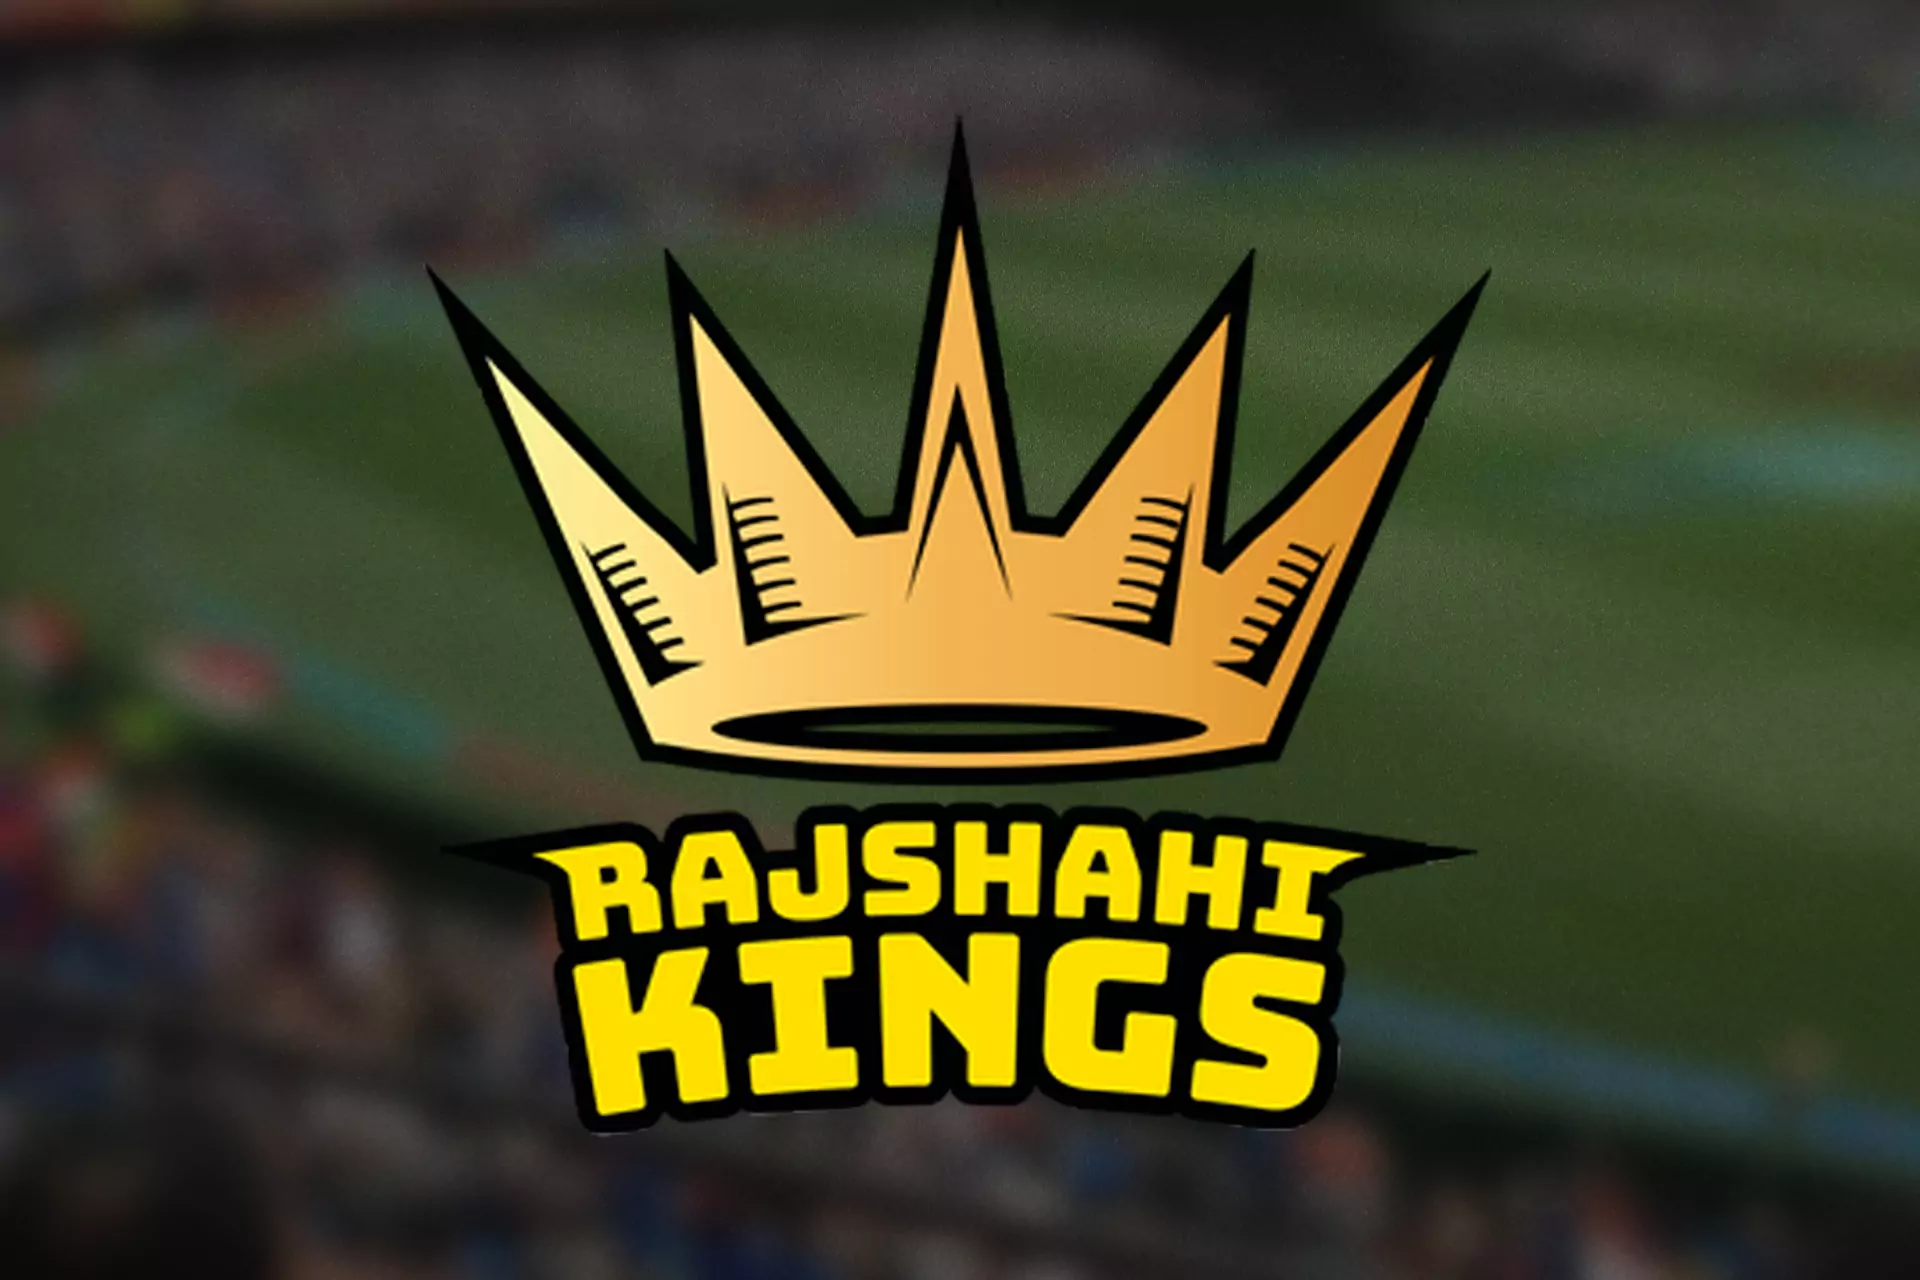 The Rajshahi Kings team has great players and a high reputation among cricket fans.